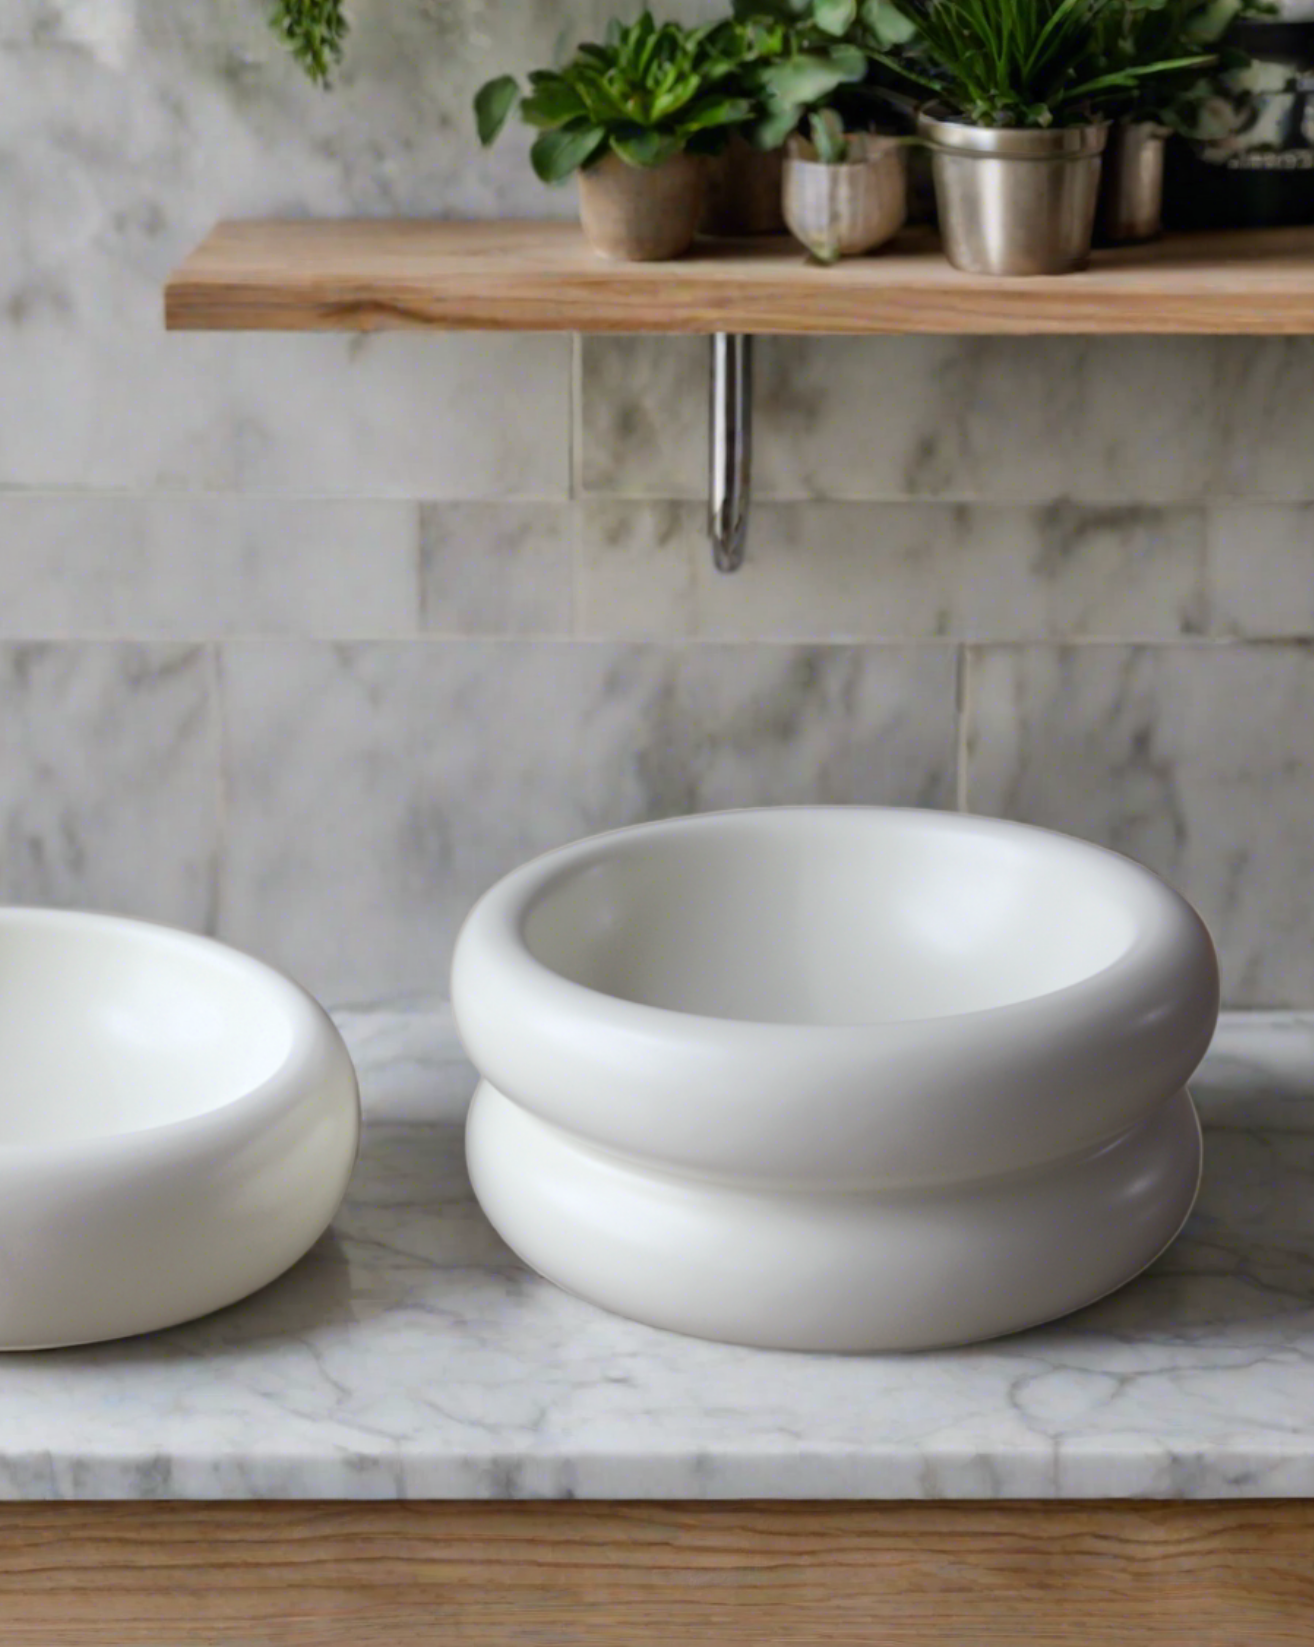 The Modern Muse Tall Pet Bowl is crafted from quality ceramic, which is both chic and practical. Home decor friendly, this bowl can be paired with the Modern Muse Low Pet Bowl for the perfect bowl combo.